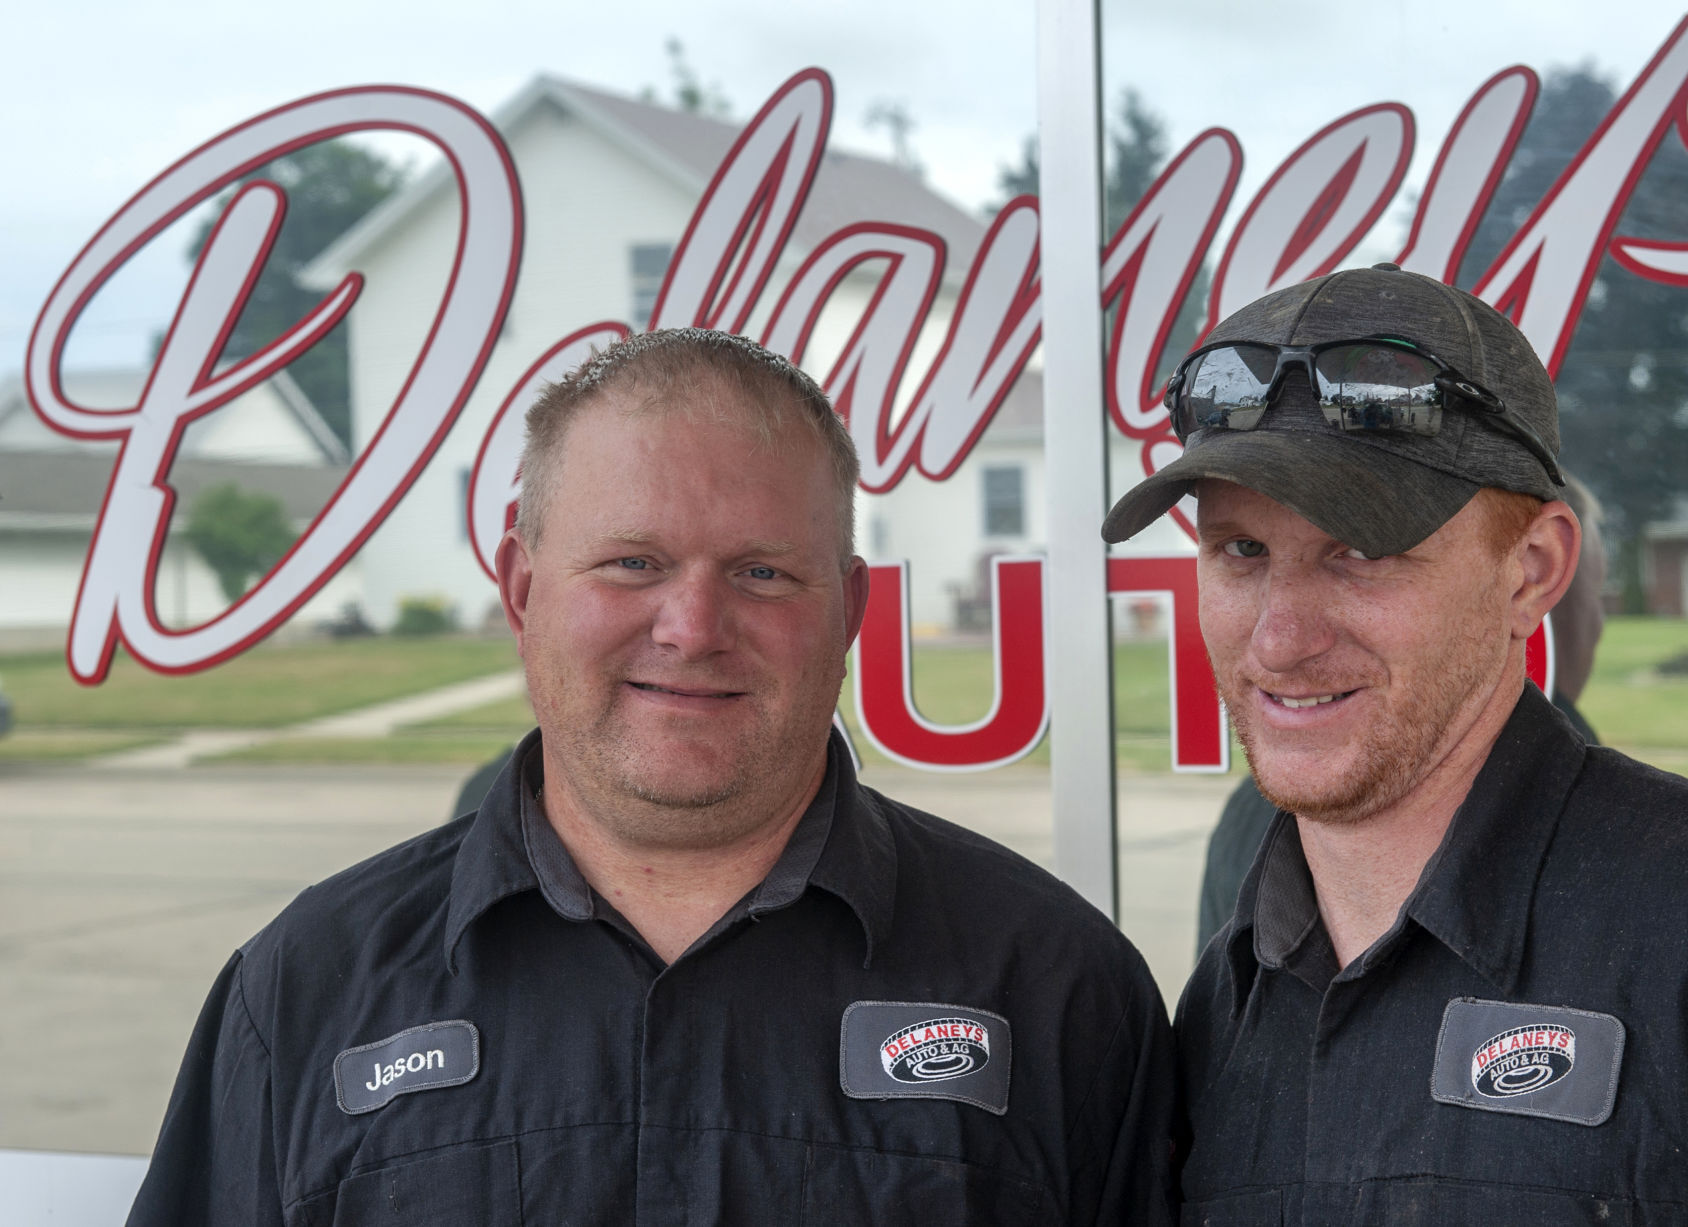 Entrepreneurial brothers, Jason and Matt Delaney, stand together at their Farley location.    PHOTO CREDIT: Dave LaBelle